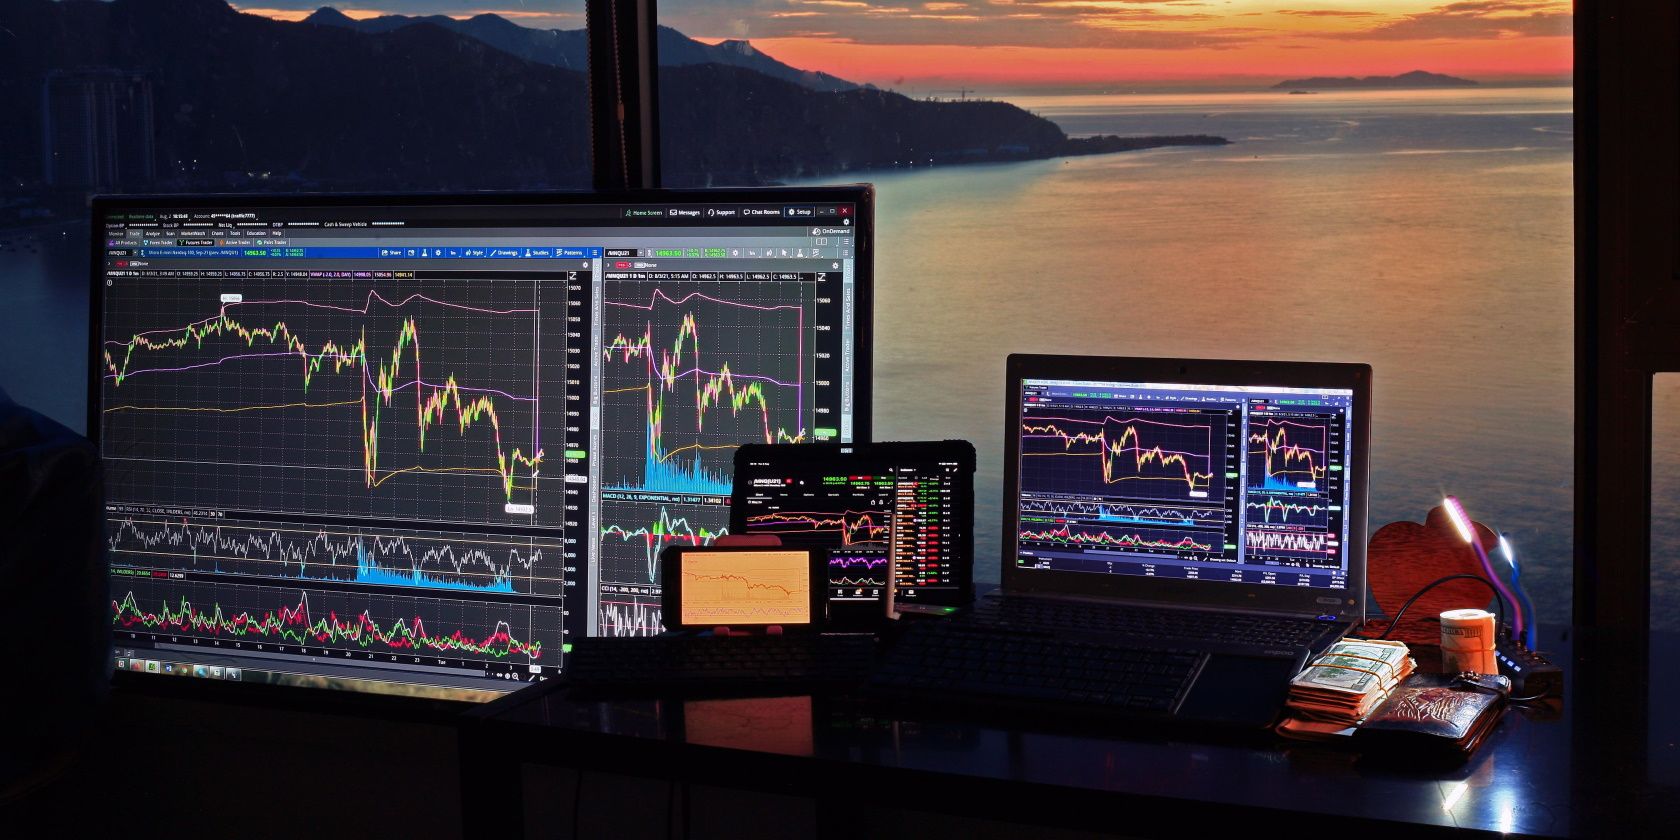 different trading charts and indicators on smart device and an ocean view 